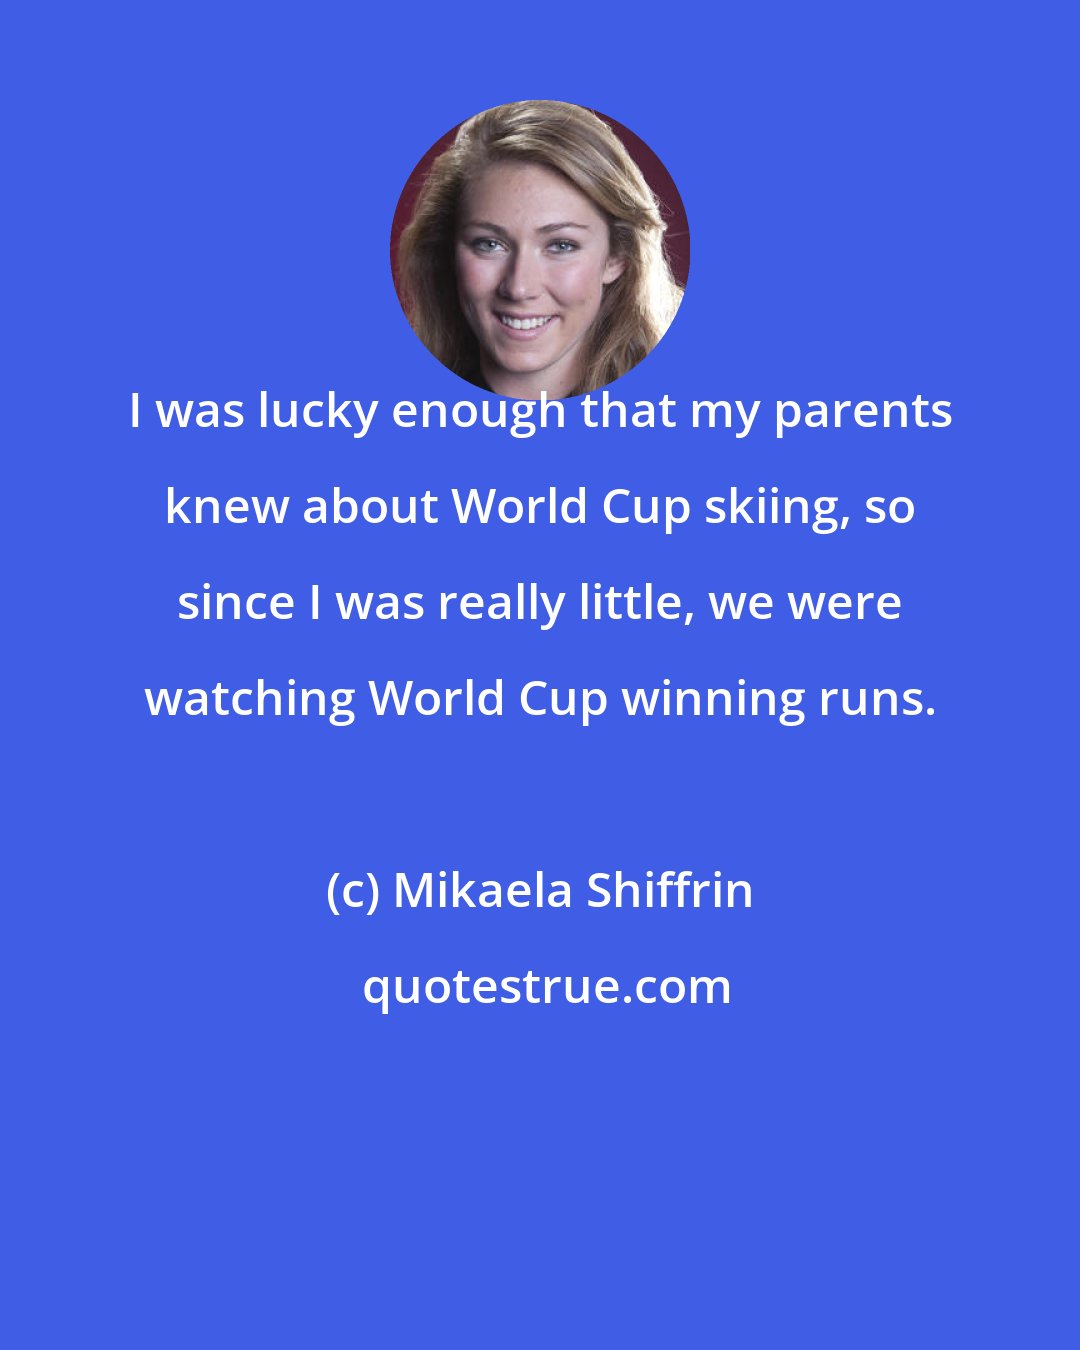 Mikaela Shiffrin: I was lucky enough that my parents knew about World Cup skiing, so since I was really little, we were watching World Cup winning runs.